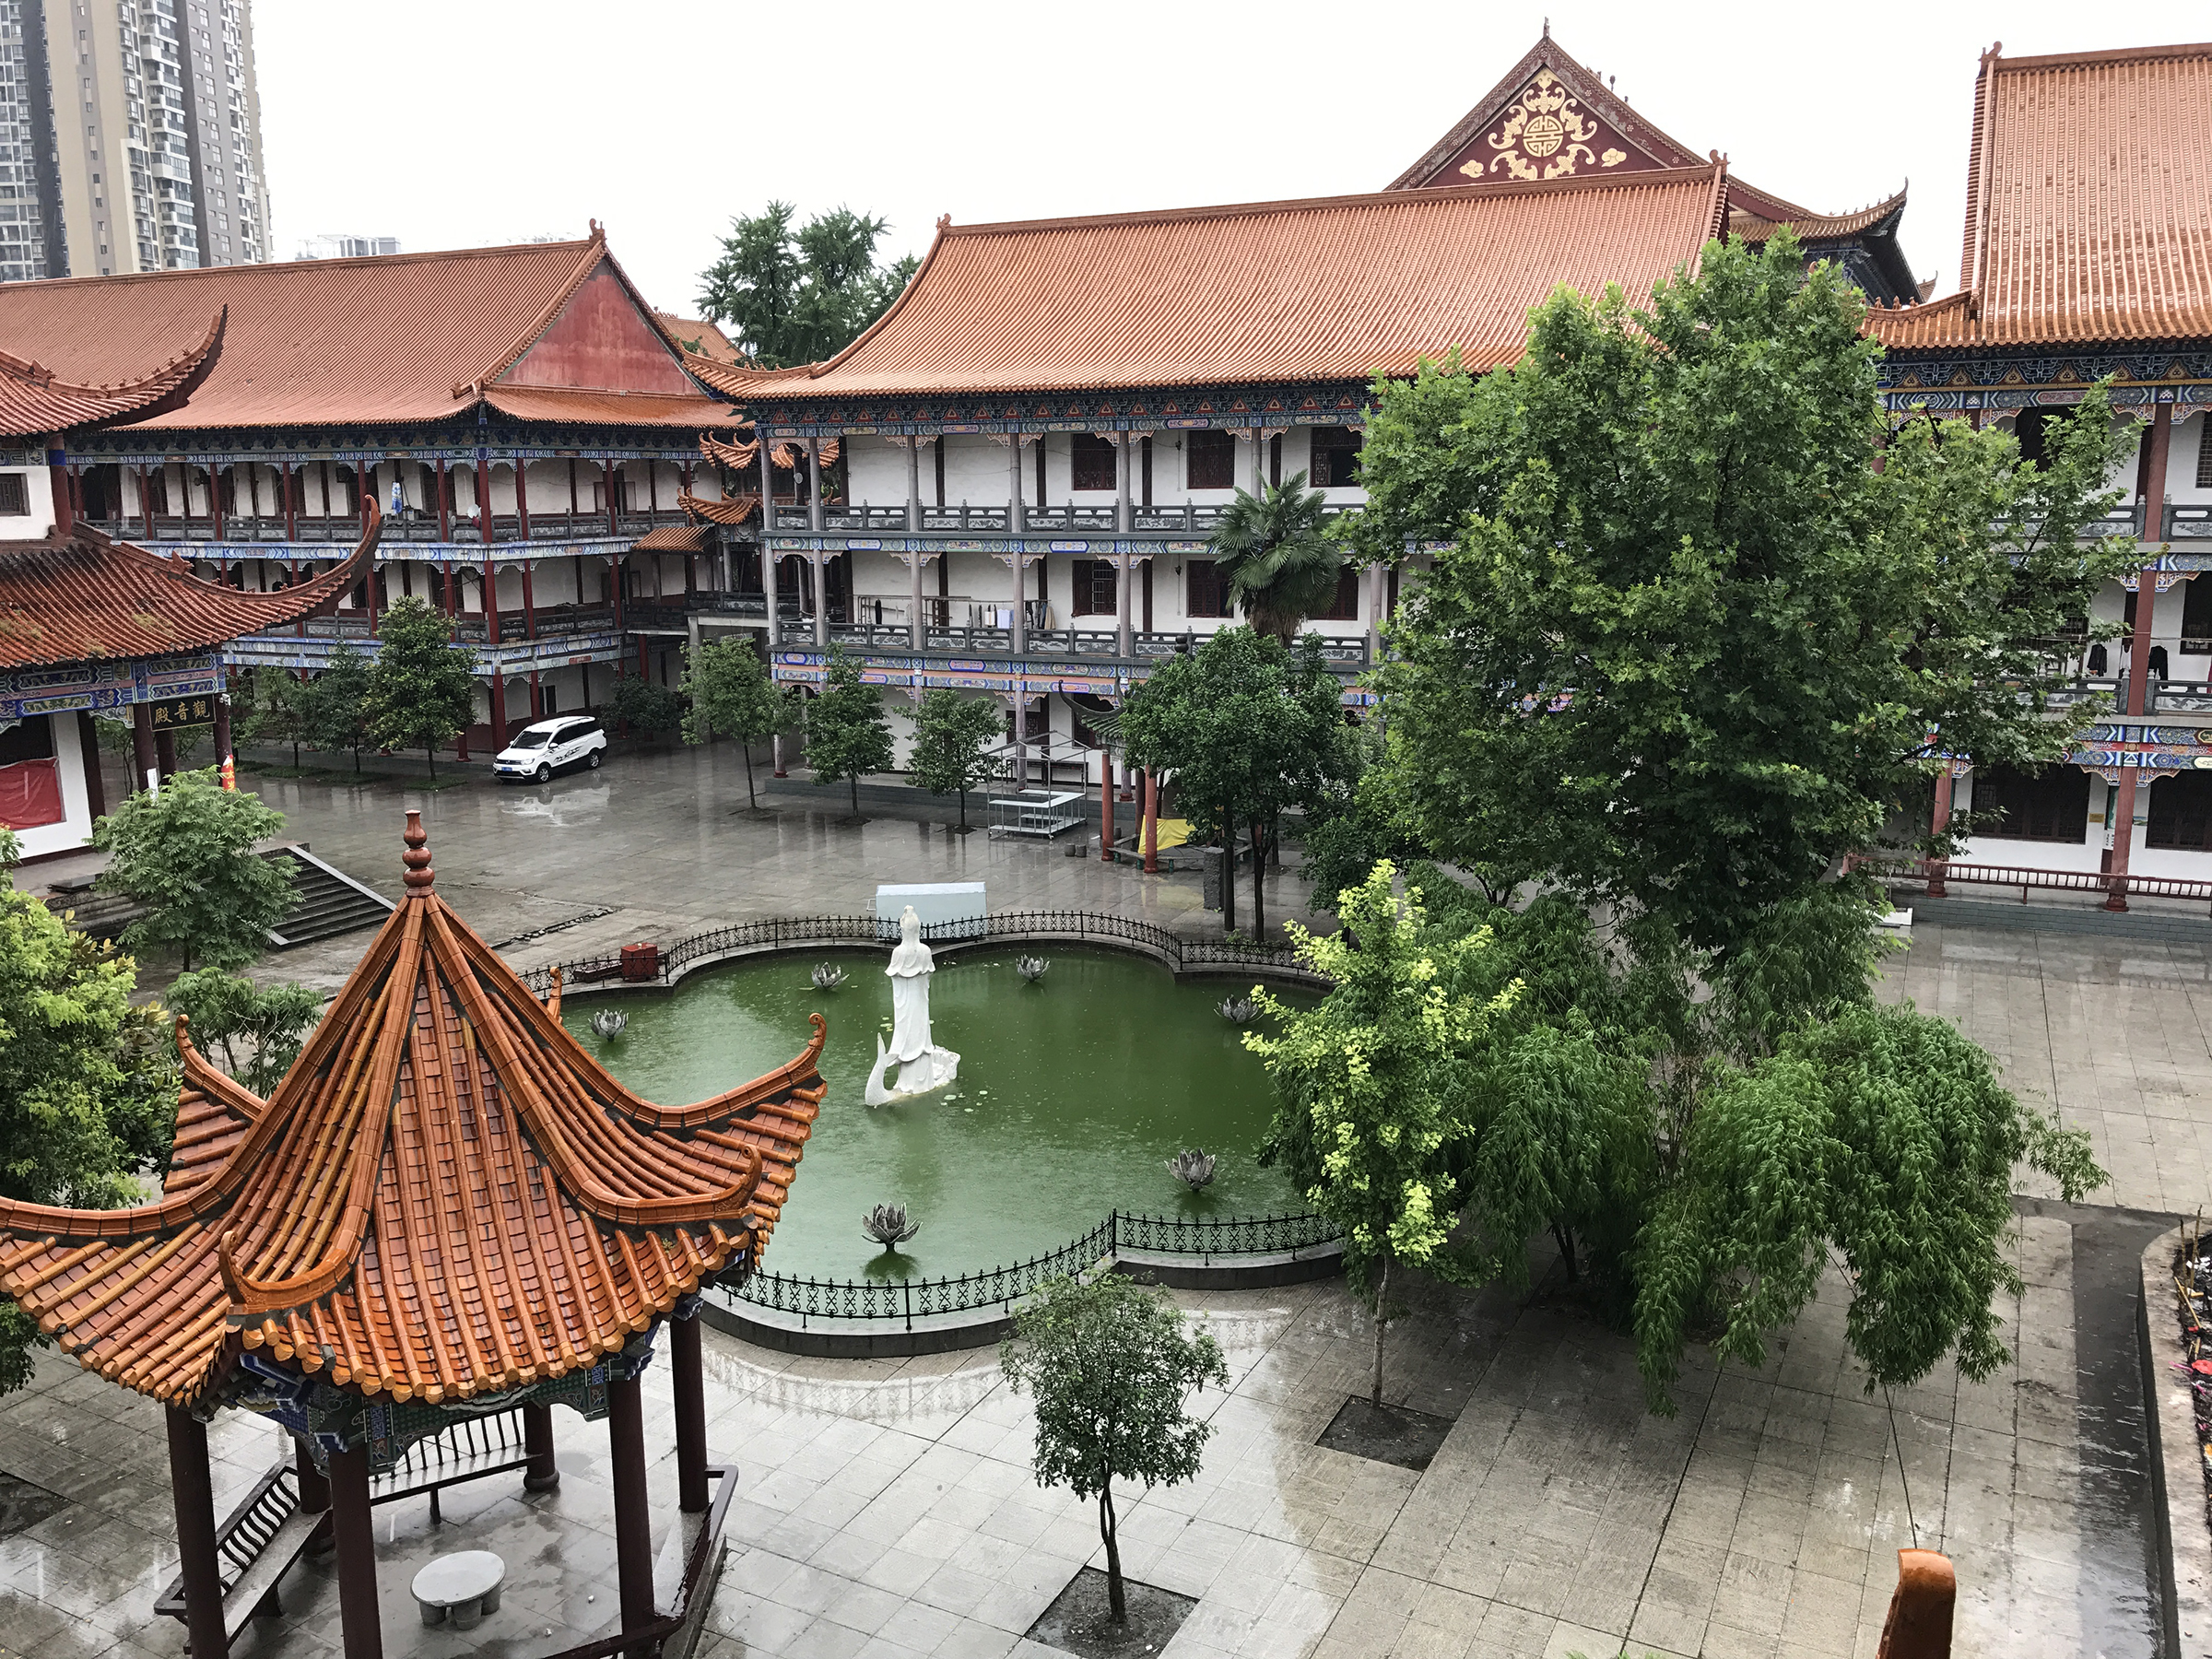  The view from the tower at Zhanghua Monastery,&nbsp;Jingzhou 